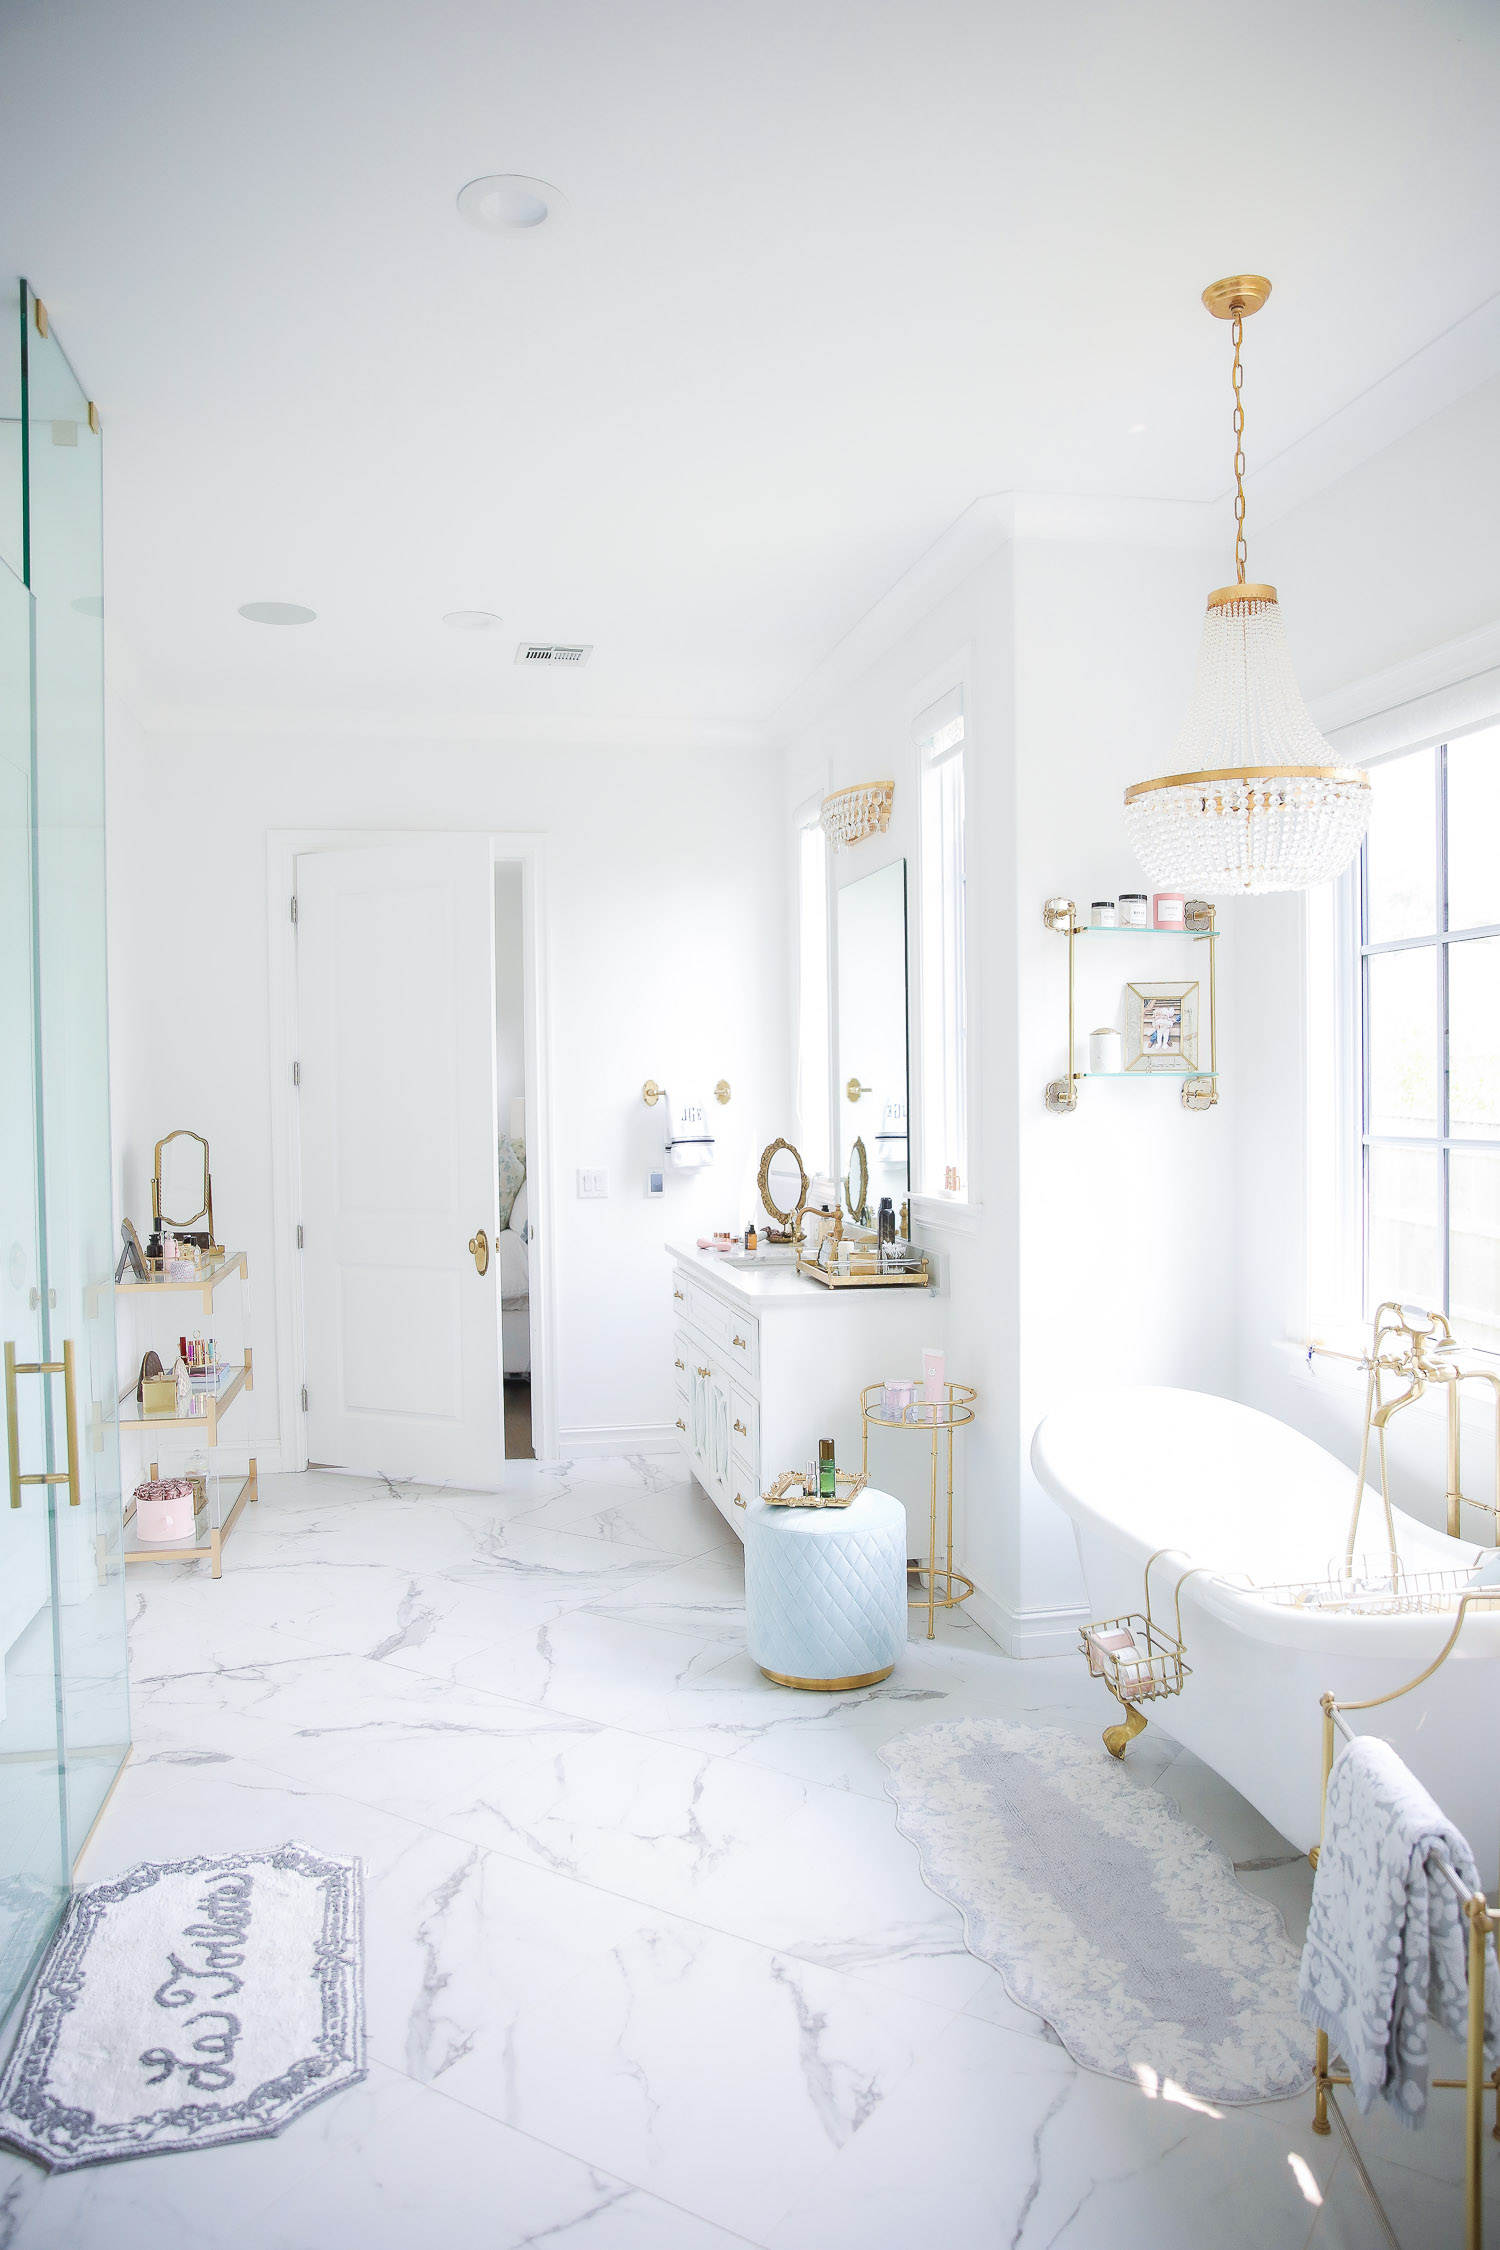 Emily gemma master bathroom, Nordstrom anniversary sale 2021 beauty must haves, anthropologie bathrom decor 2021, pinterest bathroom all white gold | Nordstrom Anniversary Sale 2021 by popular US life and style blog, The Sweetest Thing: image of a master bedroom with marble flooring, white and gold clawfoot tub, gold and crystal chandelier, gold metal towel stand and walk in shower. 